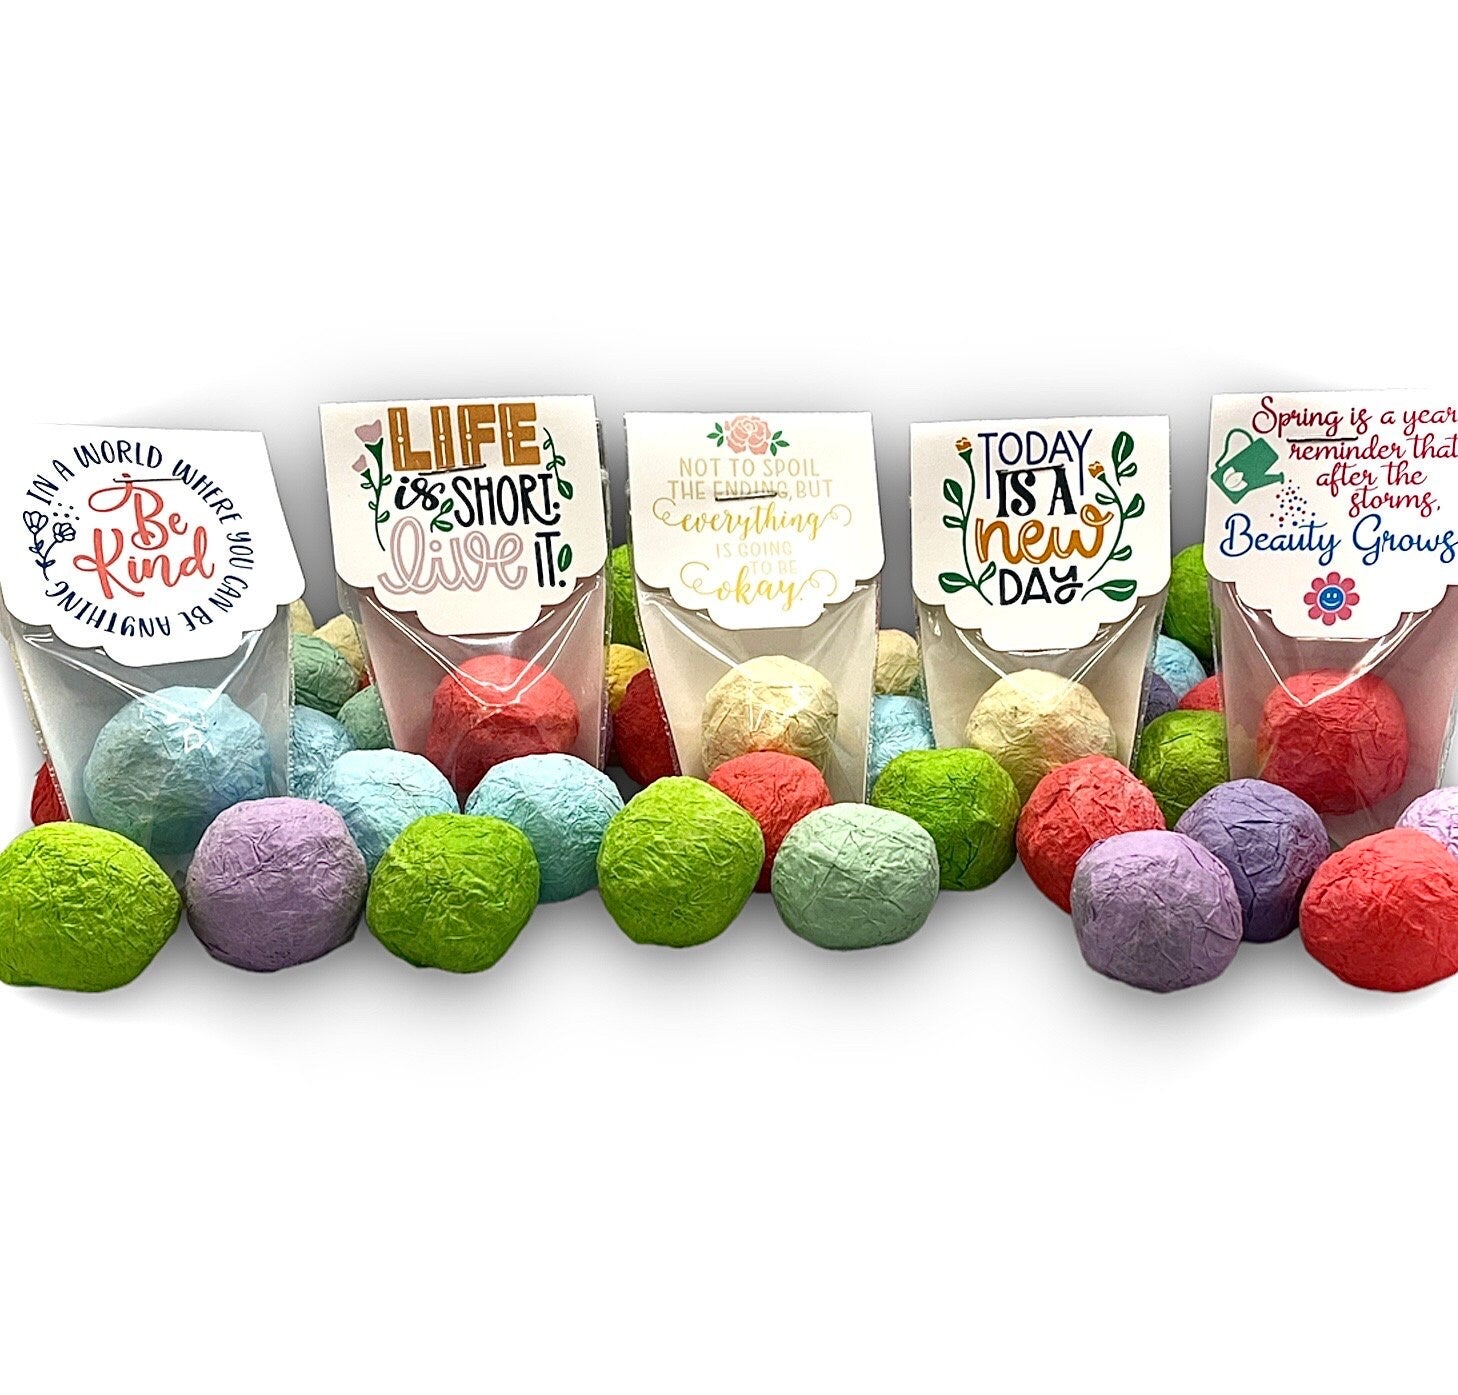 Seed Bombs - Custom Colors - Individually Wrapped for Vibrant Wildflower Blooms - Canadian Wildflower